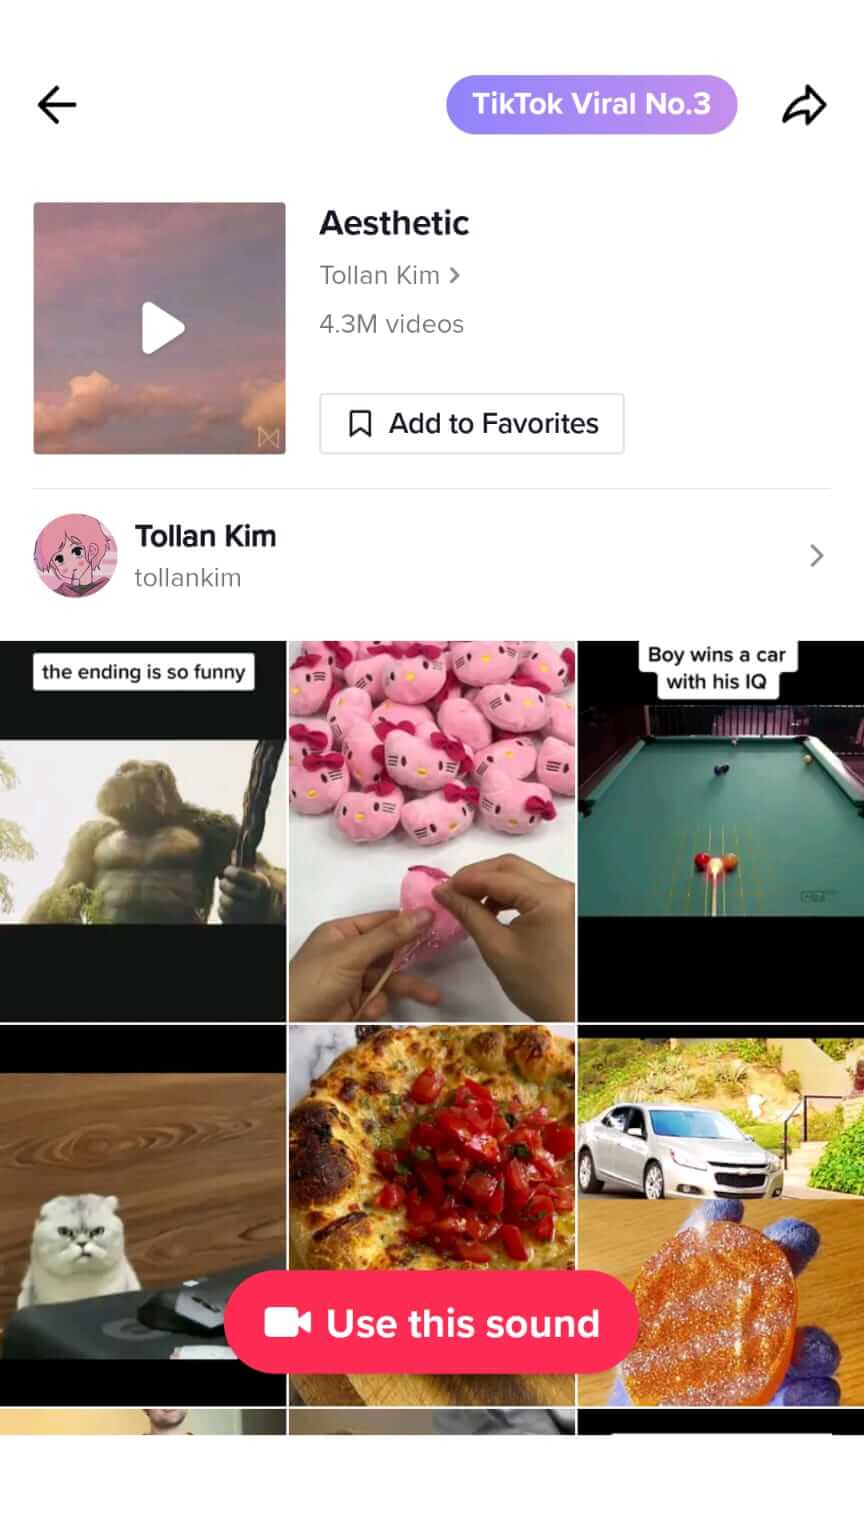 types-of-content-a-business-needs-on-tiktok-trends-content-use-this-sound-tollan-kim-example-1